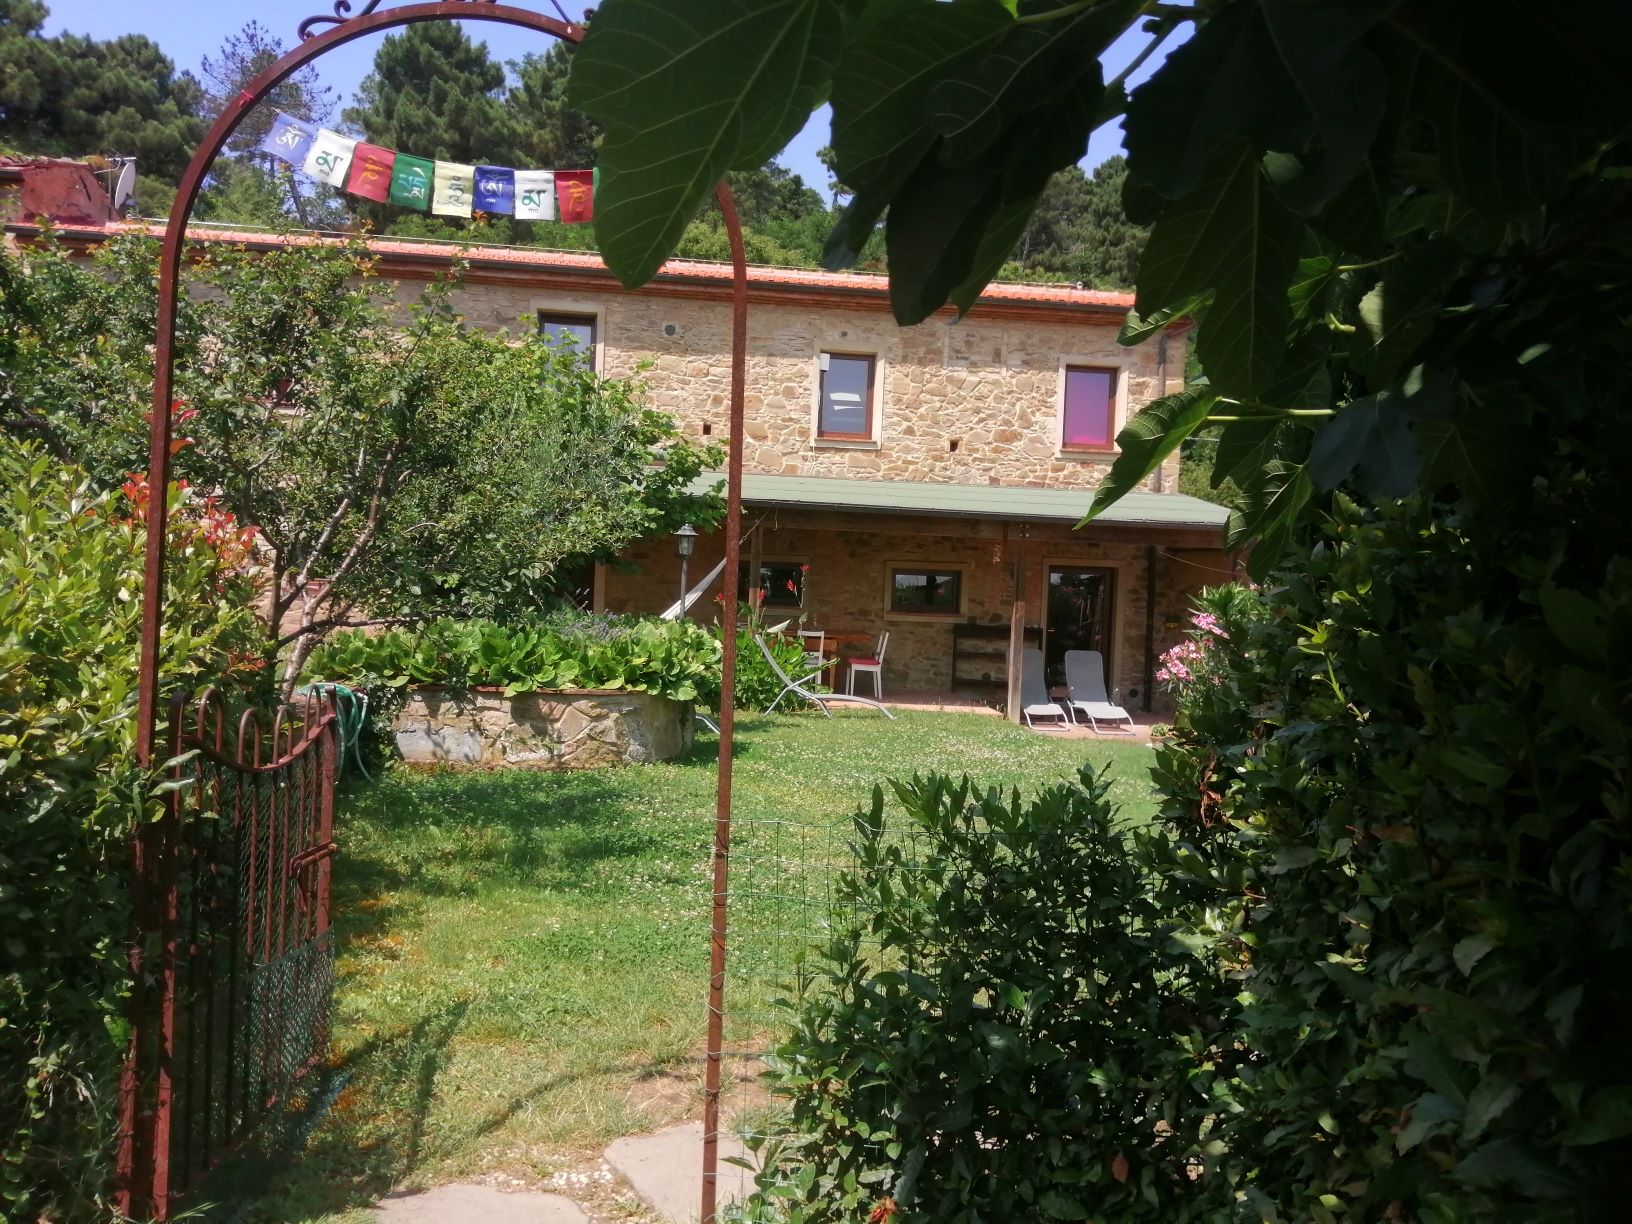 accommodations in Tuscany : hotels Tuscany, Accommodations Tuscany, bed and breakfast